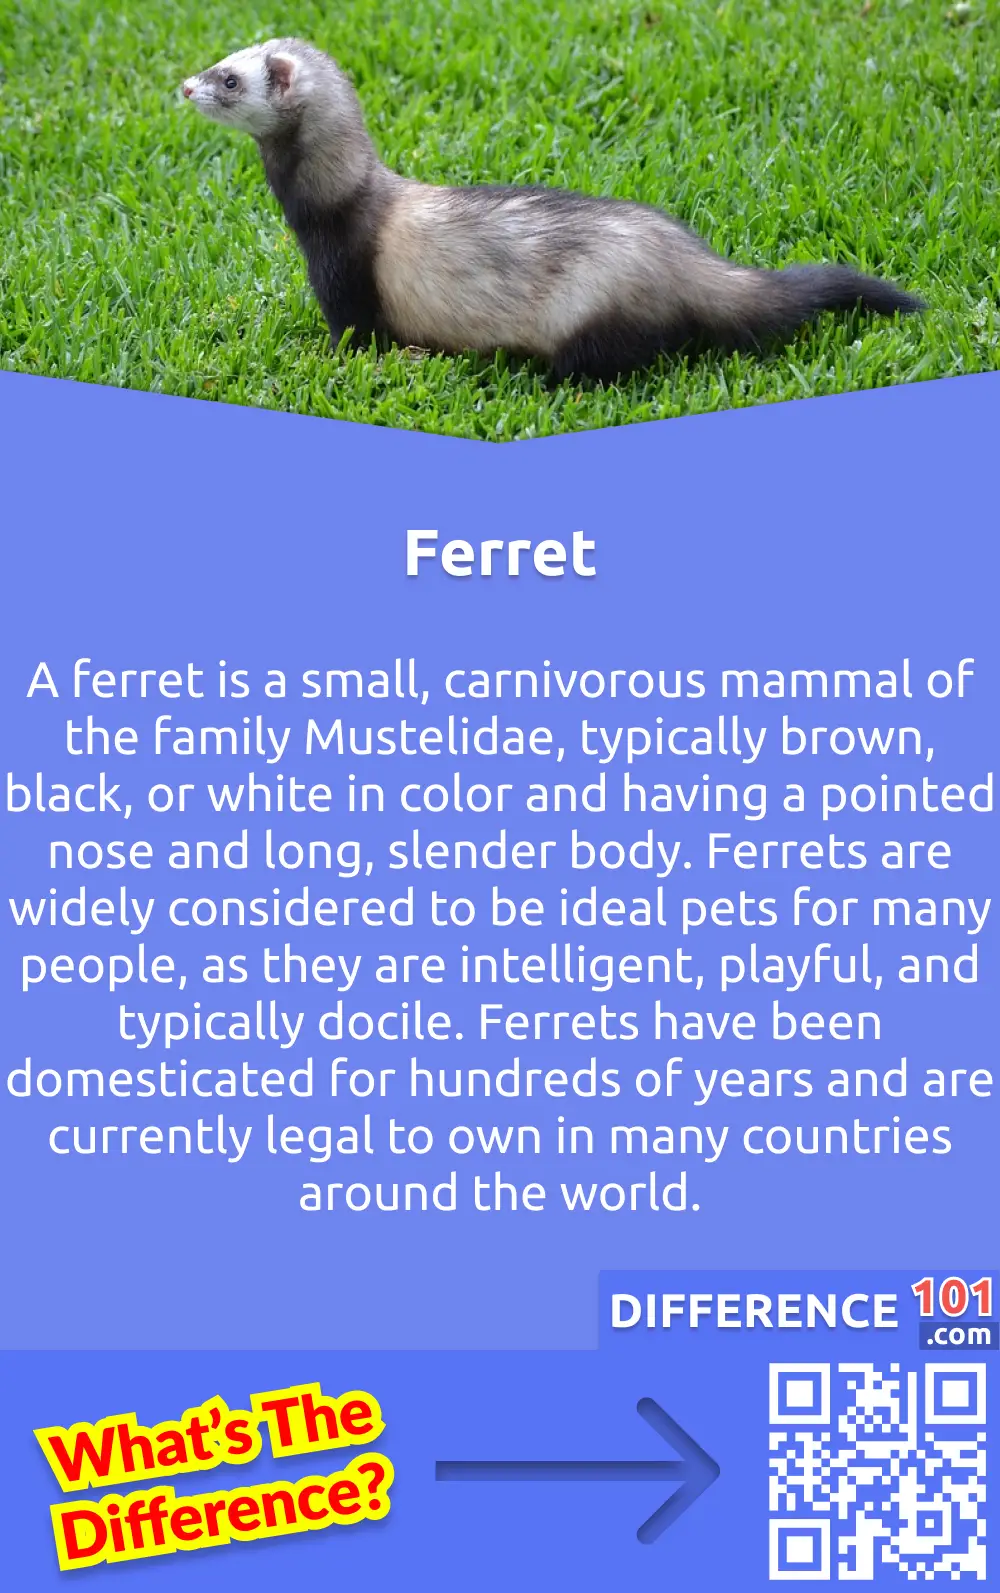 What Is Ferret? A ferret is a small, carnivorous mammal of the family Mustelidae, typically brown, black, or white in color and having a pointed nose and long, slender body. Ferrets are widely considered to be ideal pets for many people, as they are intelligent, playful, and typically docile. Ferrets have been domesticated for hundreds of years and are currently legal to own in many countries around the world.